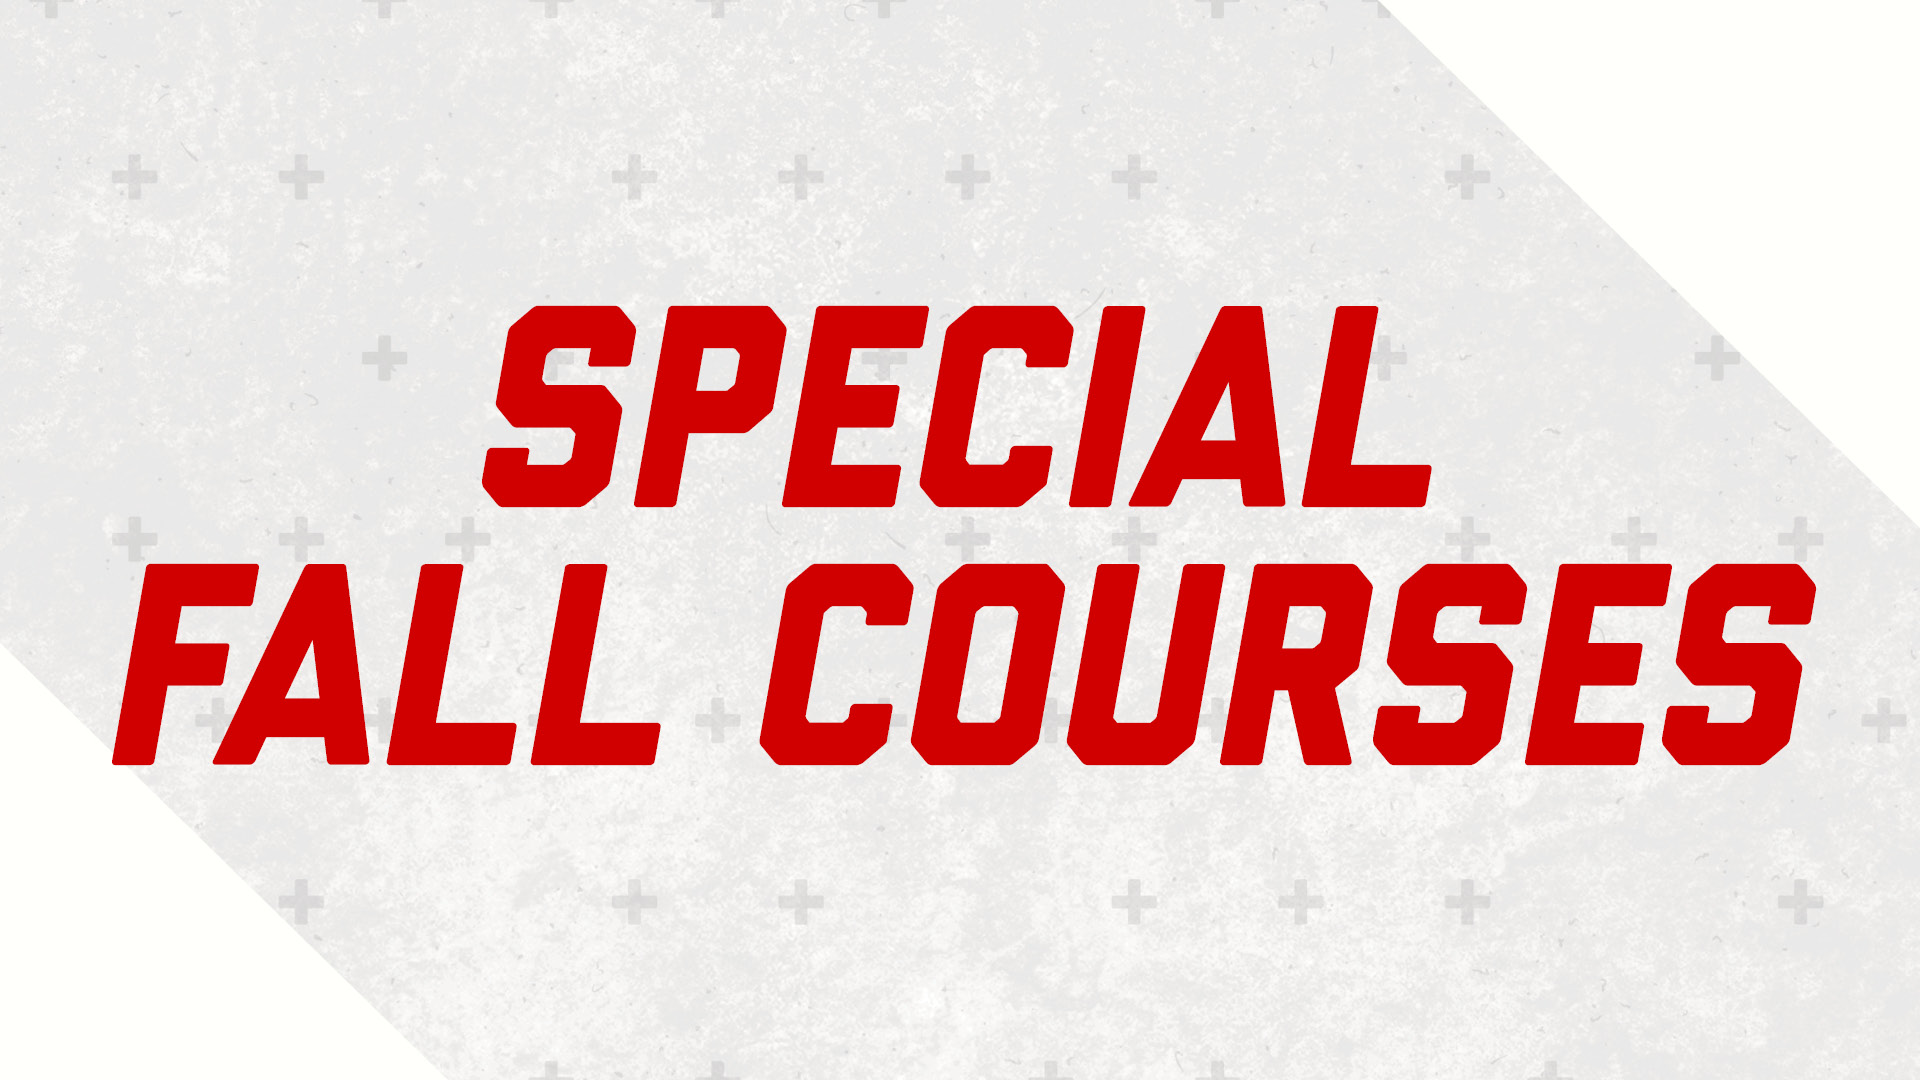 Special Fall Courses